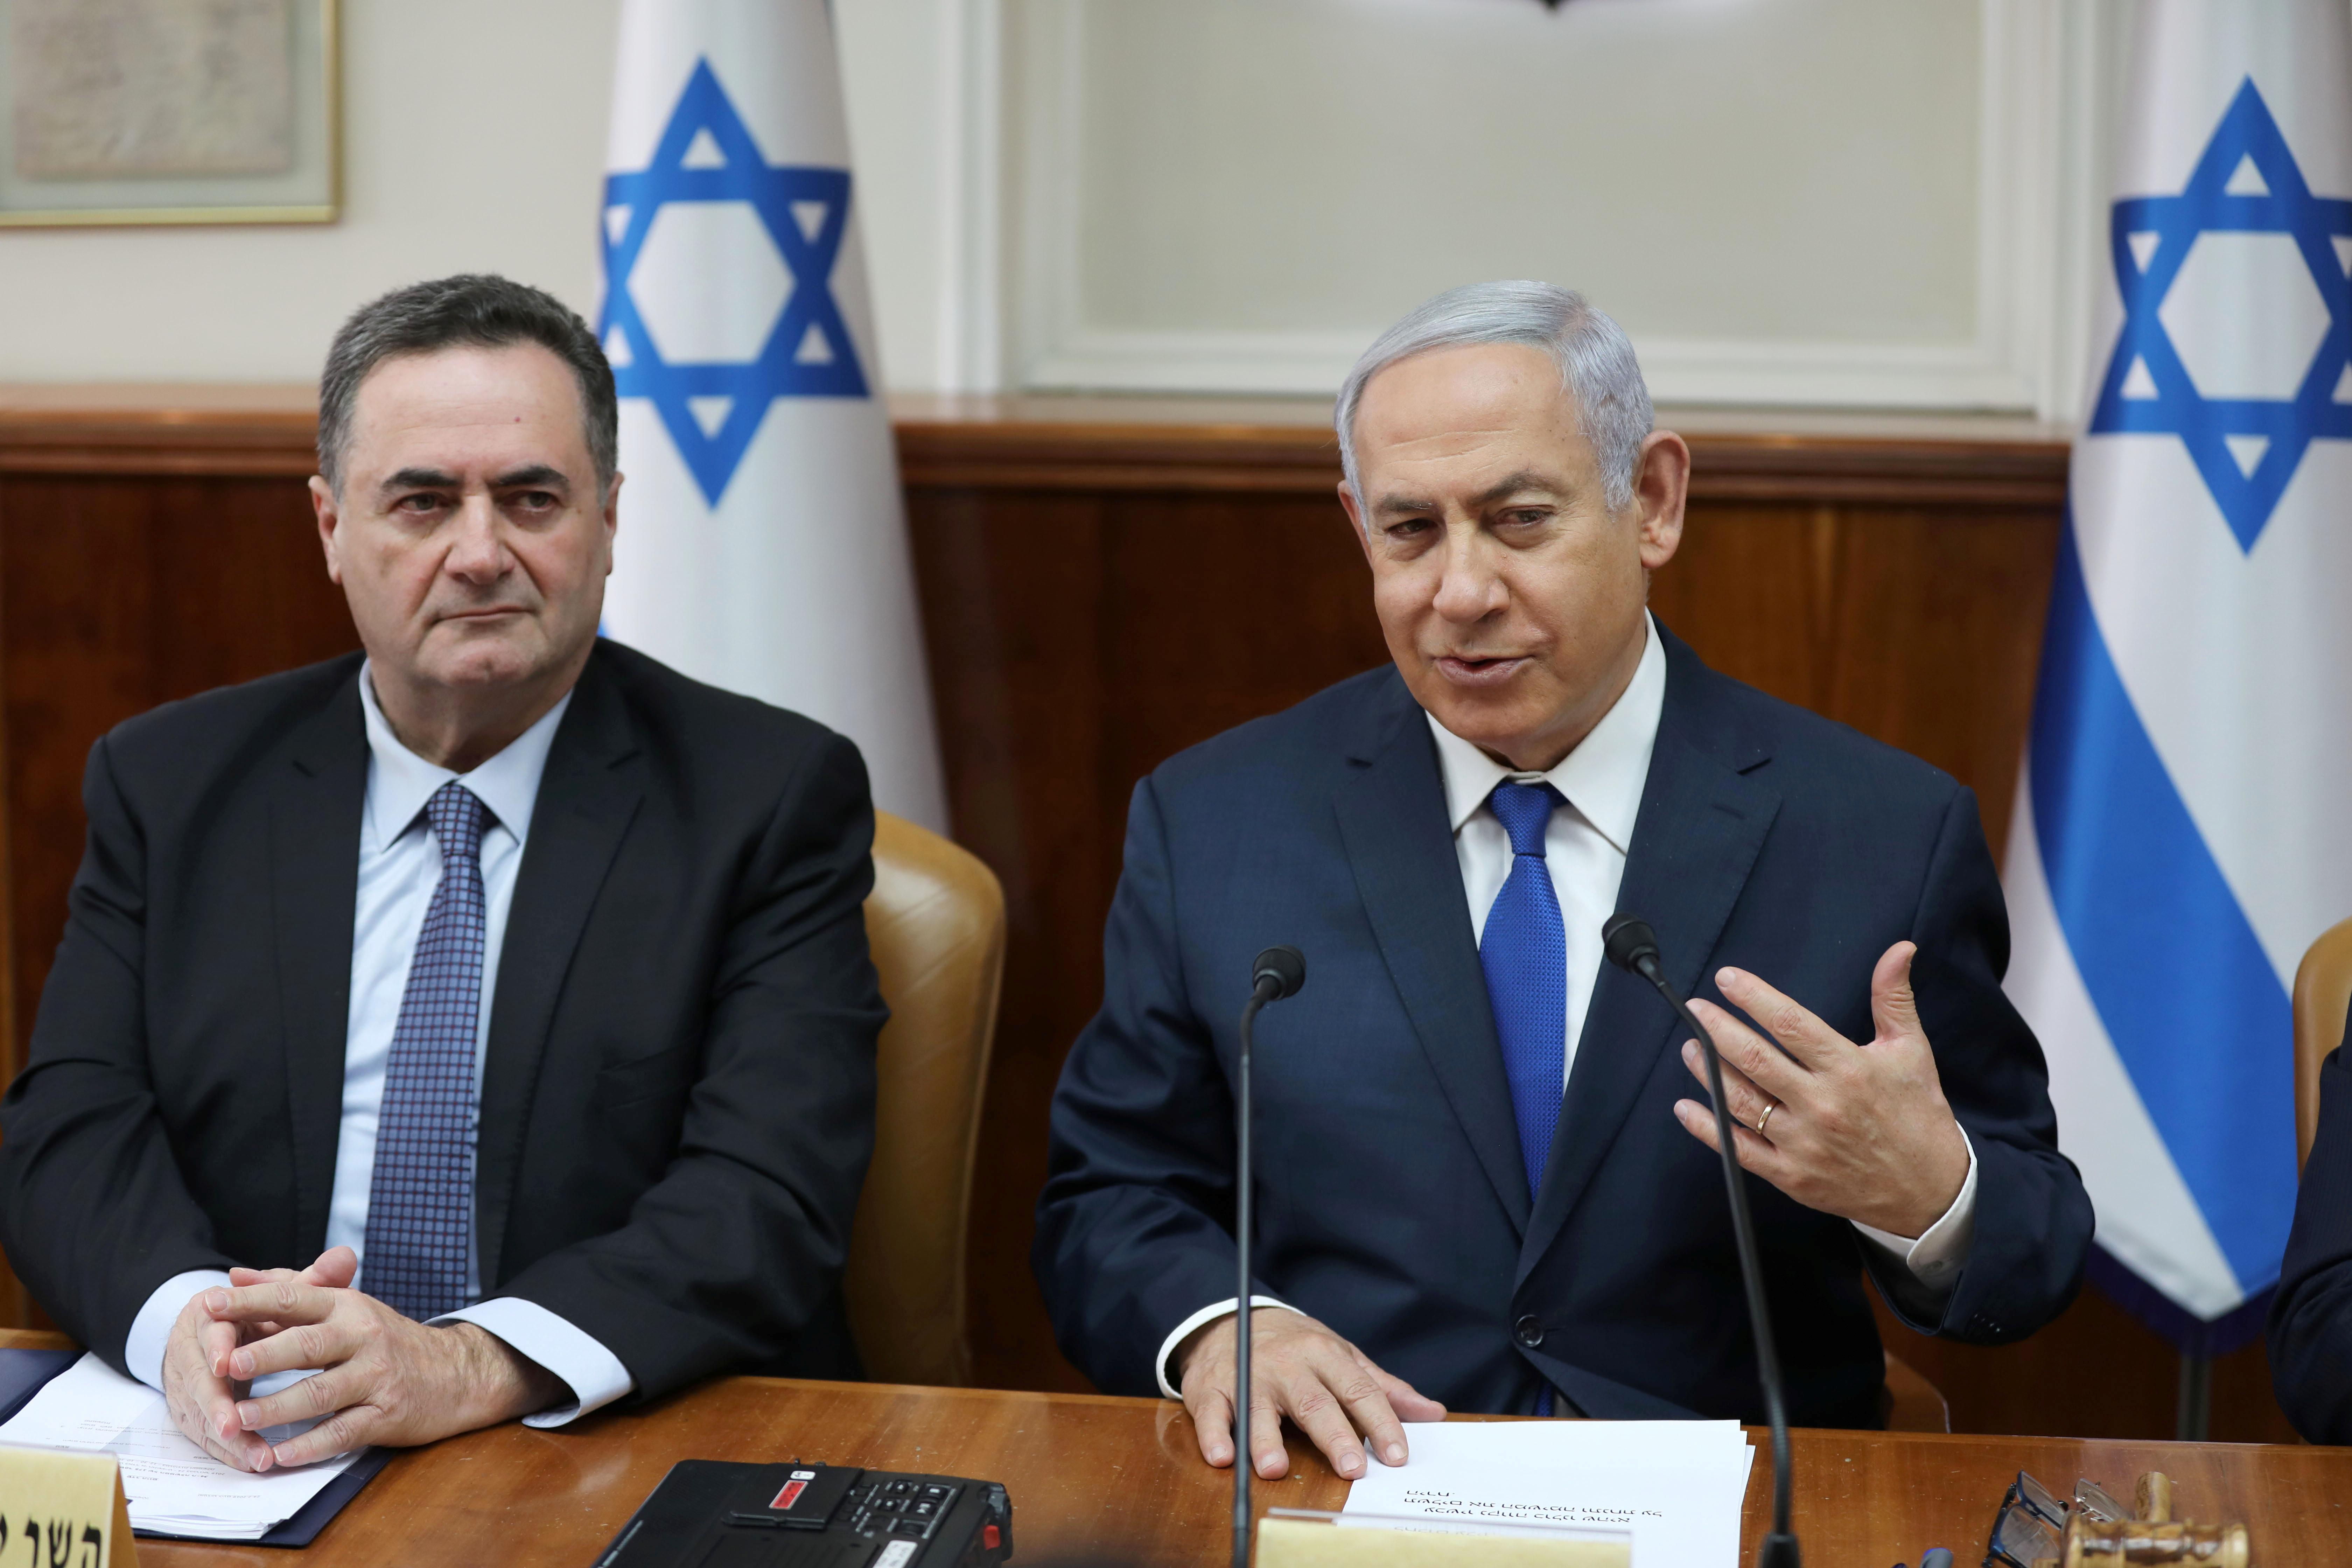 Israeli Prime Minister Benjamin Netanyahu sits next to acting foreign minister Israel Katz, who also serves as intelligence and transport minister, during the weekly cabinet meeting in Jerusalem